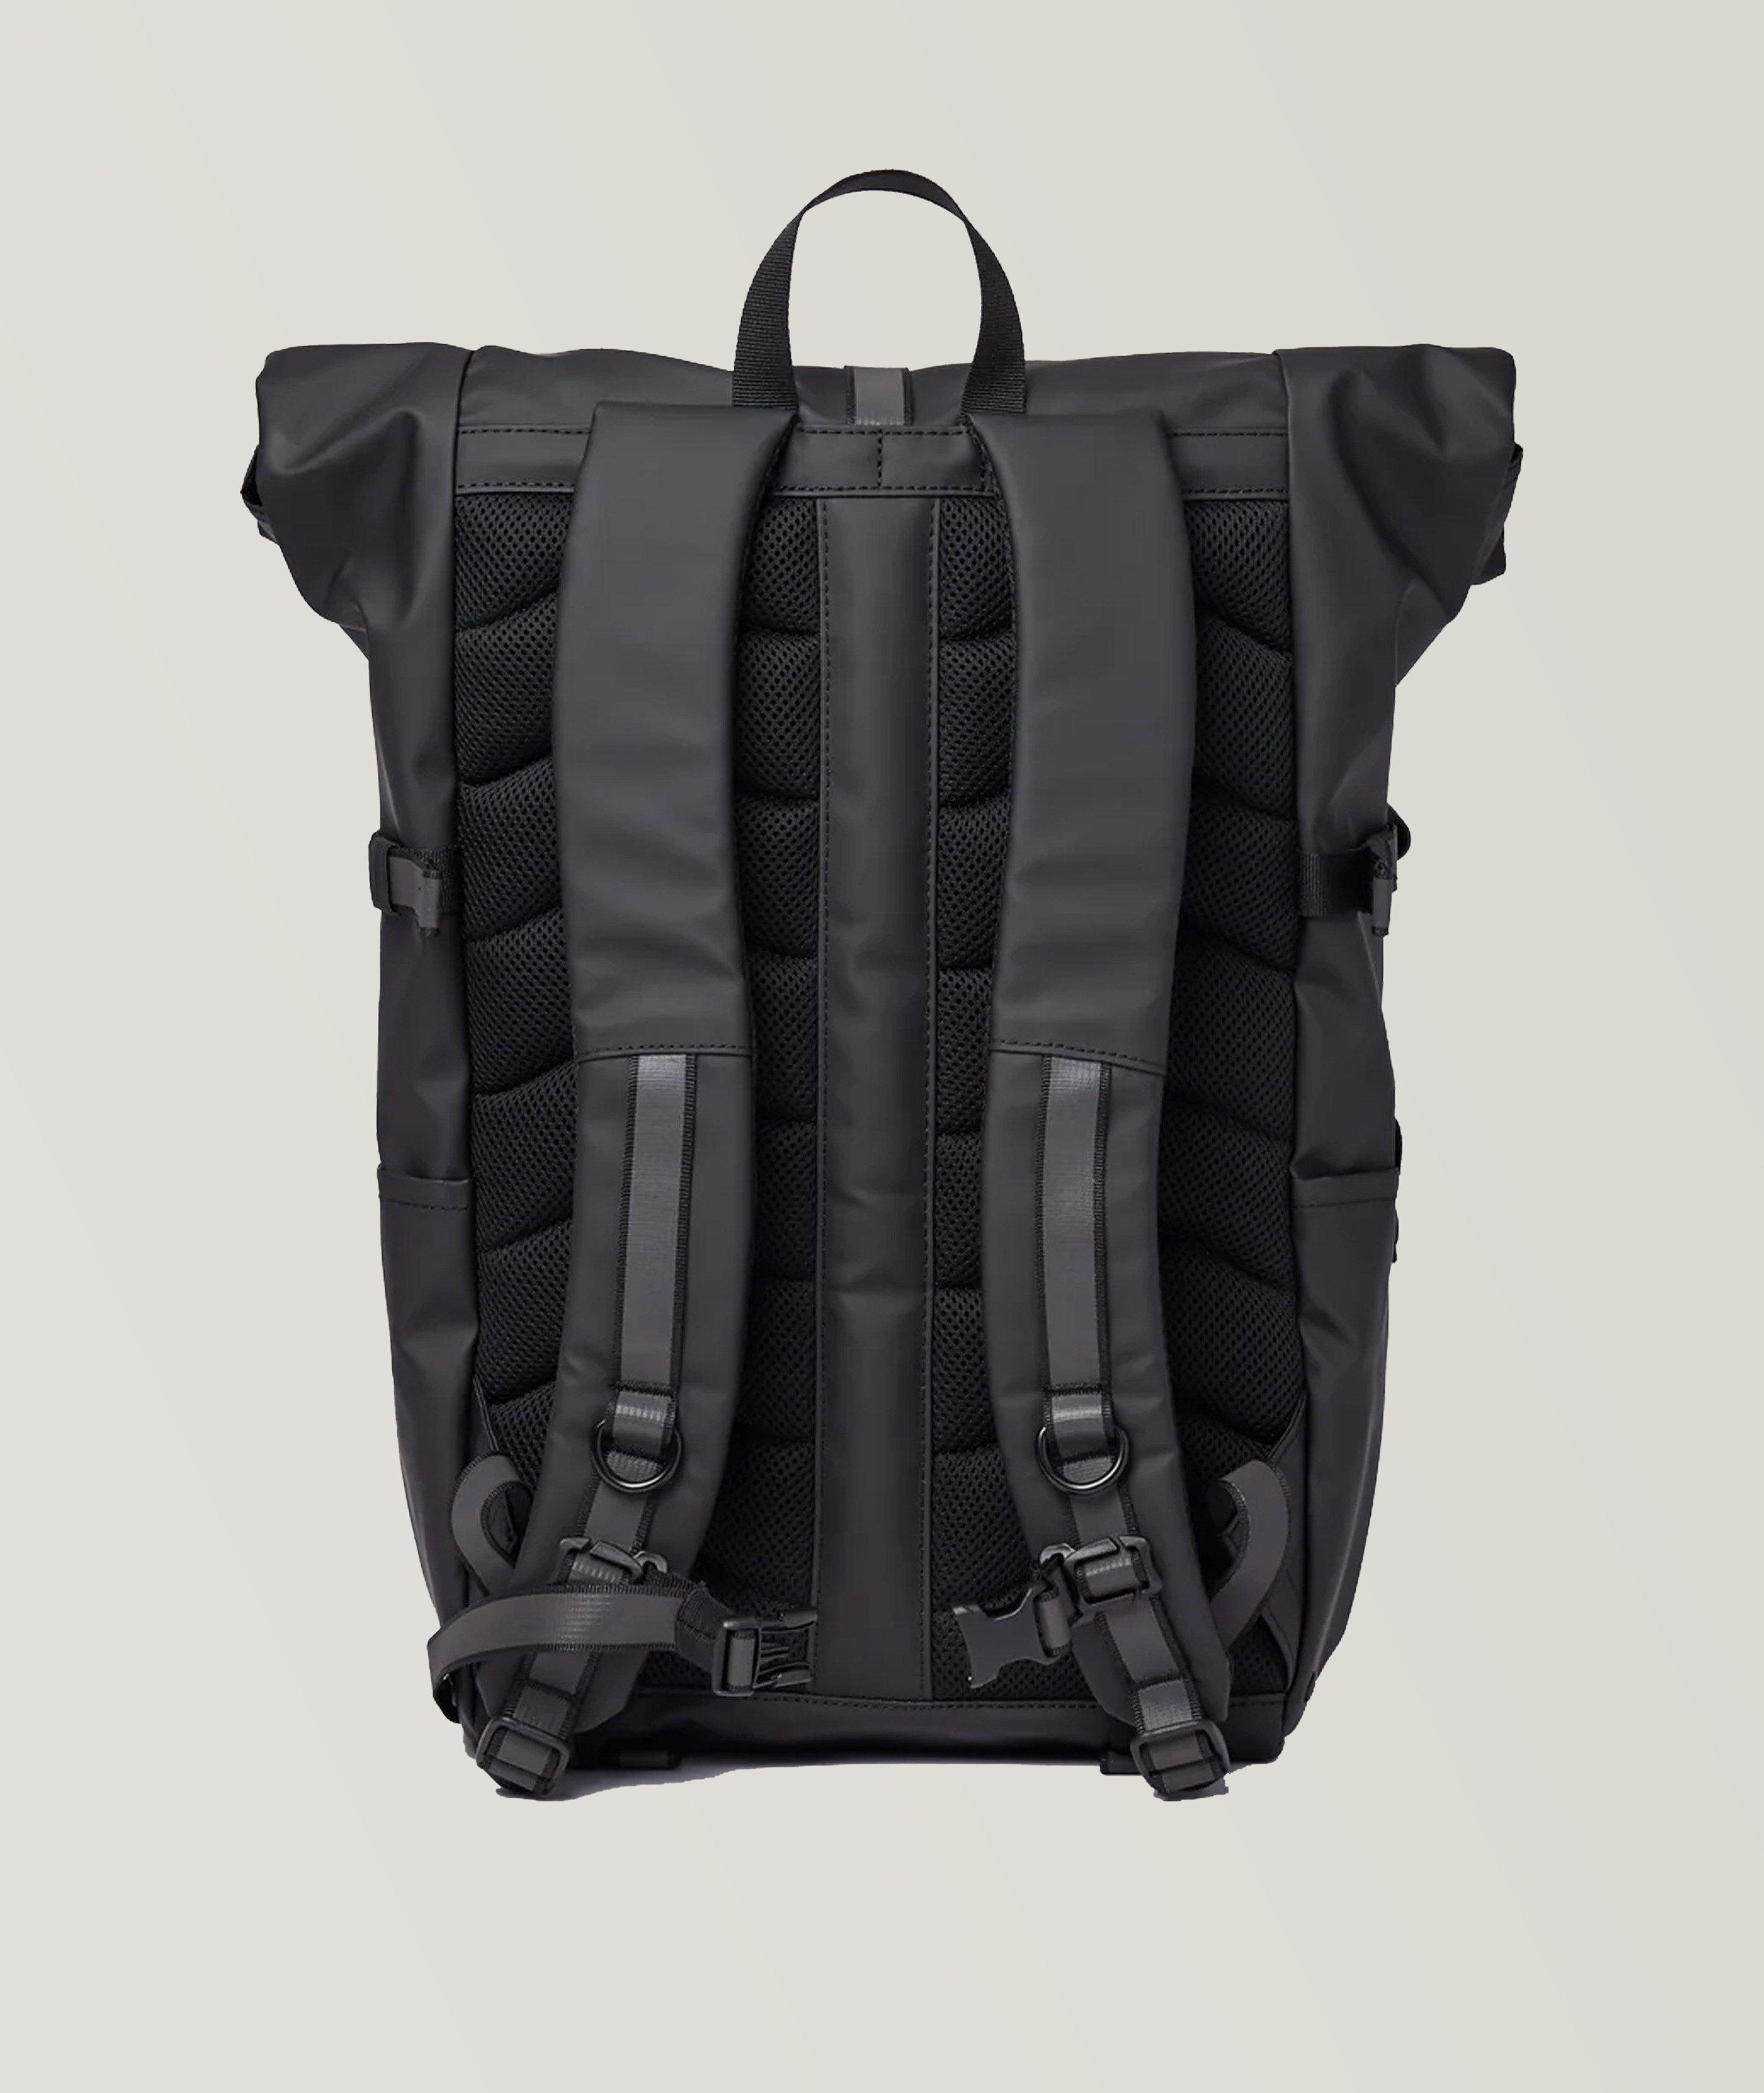 Stream Collection Ruben 2.0 Rolltop Backpack  image 1